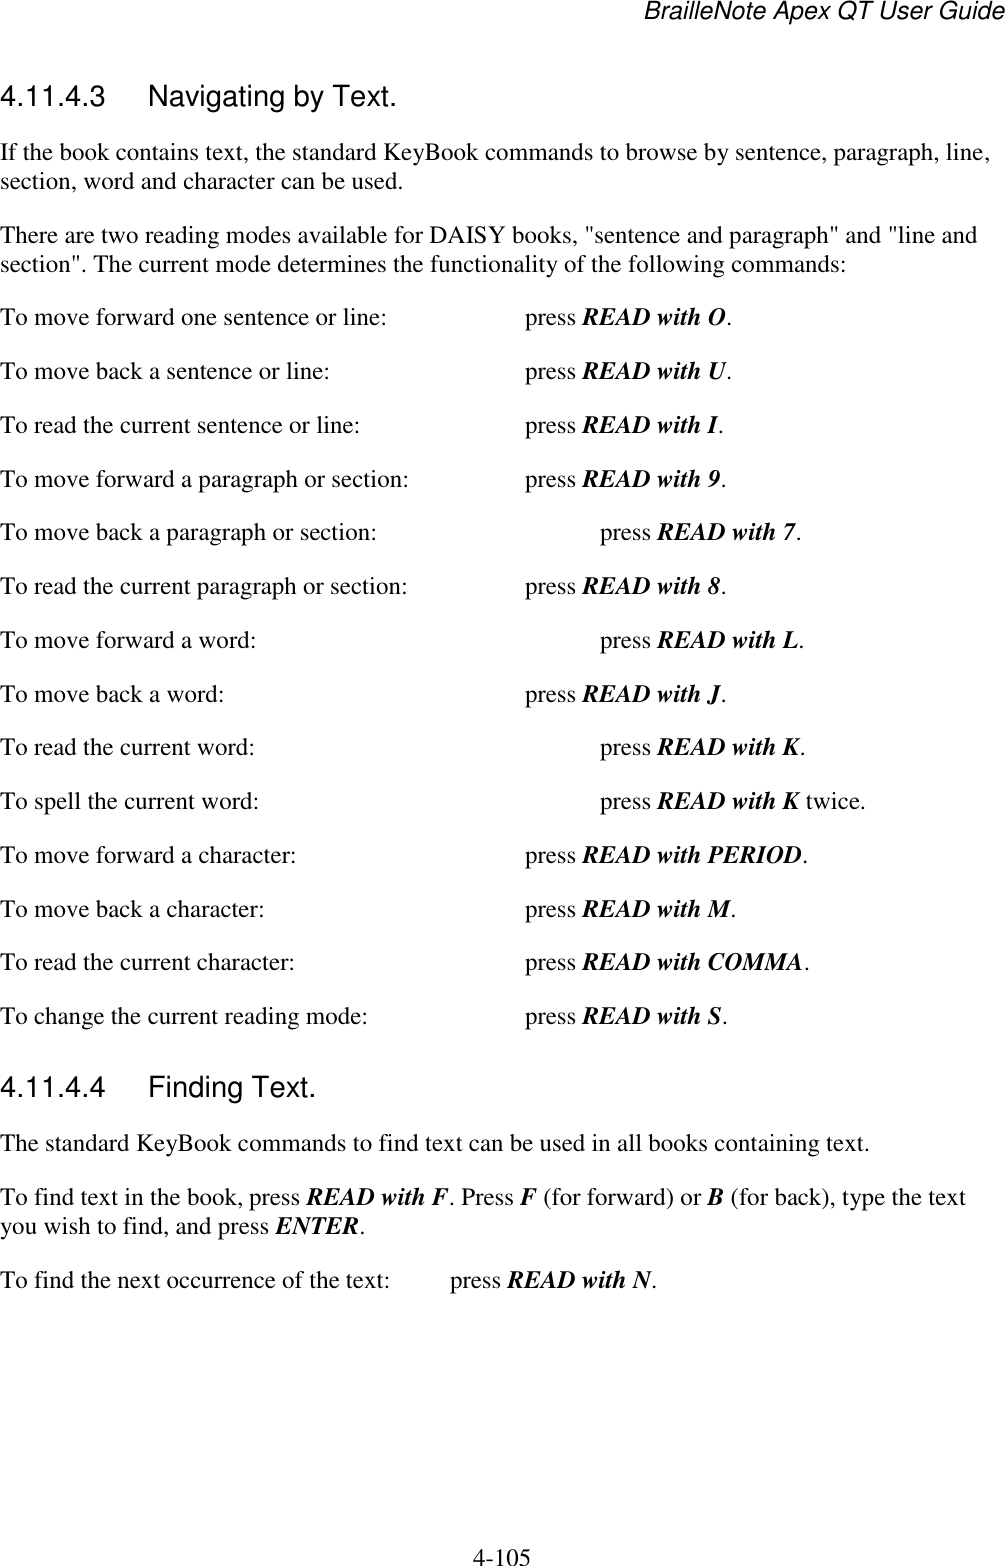 BrailleNote Apex QT User Guide  4-105   4.11.4.3  Navigating by Text. If the book contains text, the standard KeyBook commands to browse by sentence, paragraph, line, section, word and character can be used. There are two reading modes available for DAISY books, &quot;sentence and paragraph&quot; and &quot;line and section&quot;. The current mode determines the functionality of the following commands: To move forward one sentence or line:     press READ with O. To move back a sentence or line:      press READ with U. To read the current sentence or line:      press READ with I. To move forward a paragraph or section:    press READ with 9. To move back a paragraph or section:       press READ with 7. To read the current paragraph or section:    press READ with 8. To move forward a word:          press READ with L. To move back a word:        press READ with J. To read the current word:          press READ with K. To spell the current word:          press READ with K twice. To move forward a character:       press READ with PERIOD. To move back a character:        press READ with M. To read the current character:       press READ with COMMA. To change the current reading mode:     press READ with S.  4.11.4.4  Finding Text. The standard KeyBook commands to find text can be used in all books containing text.  To find text in the book, press READ with F. Press F (for forward) or B (for back), type the text you wish to find, and press ENTER. To find the next occurrence of the text:  press READ with N.  